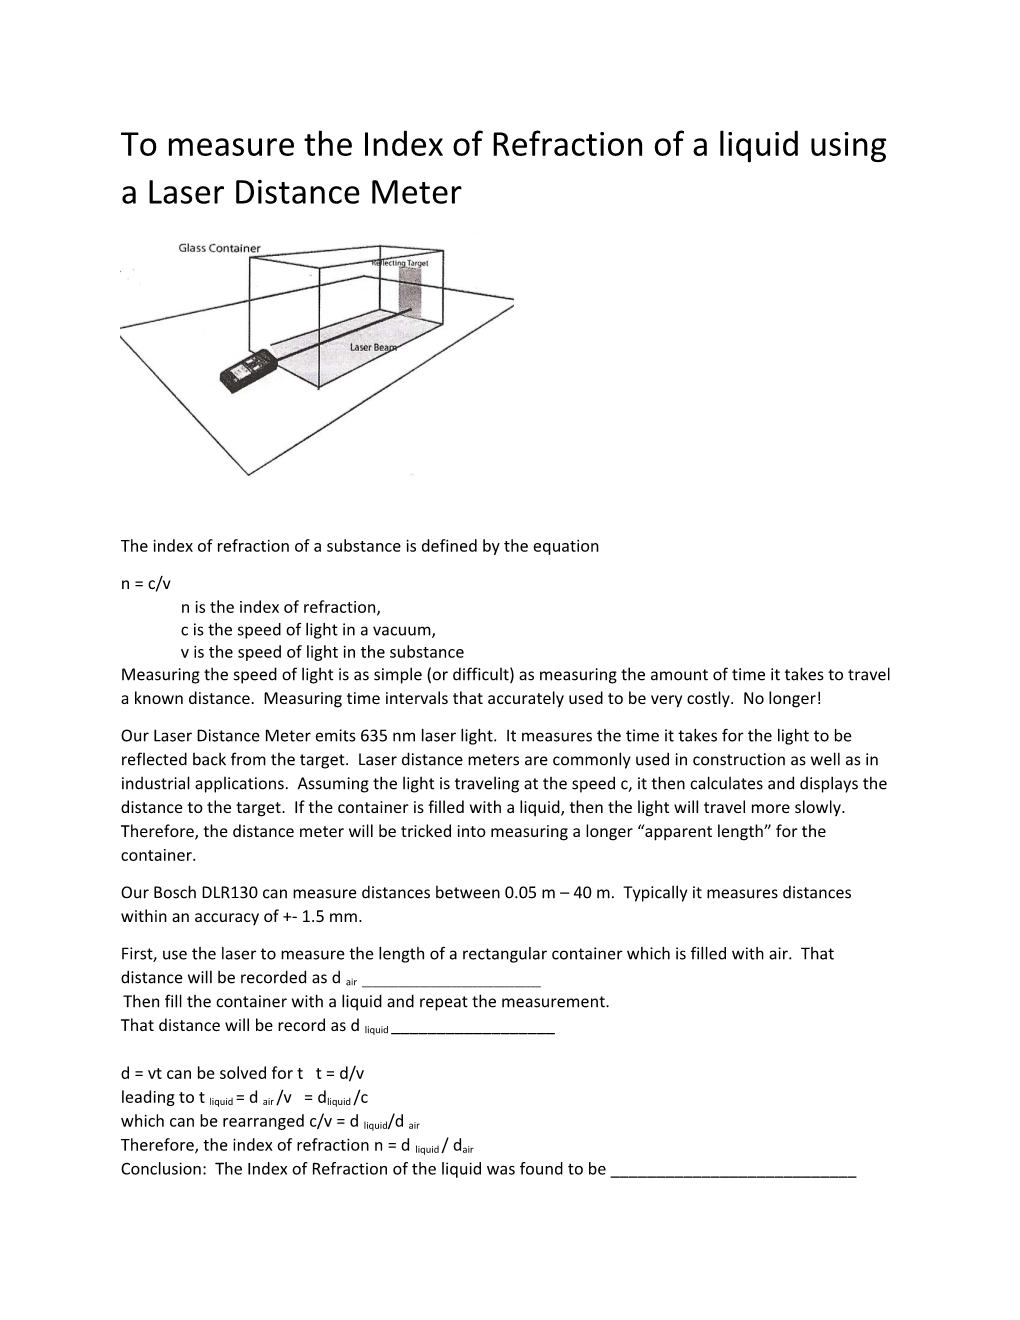 To Measure the Index of Refraction of a Liquid Using a Laser Distance Meter